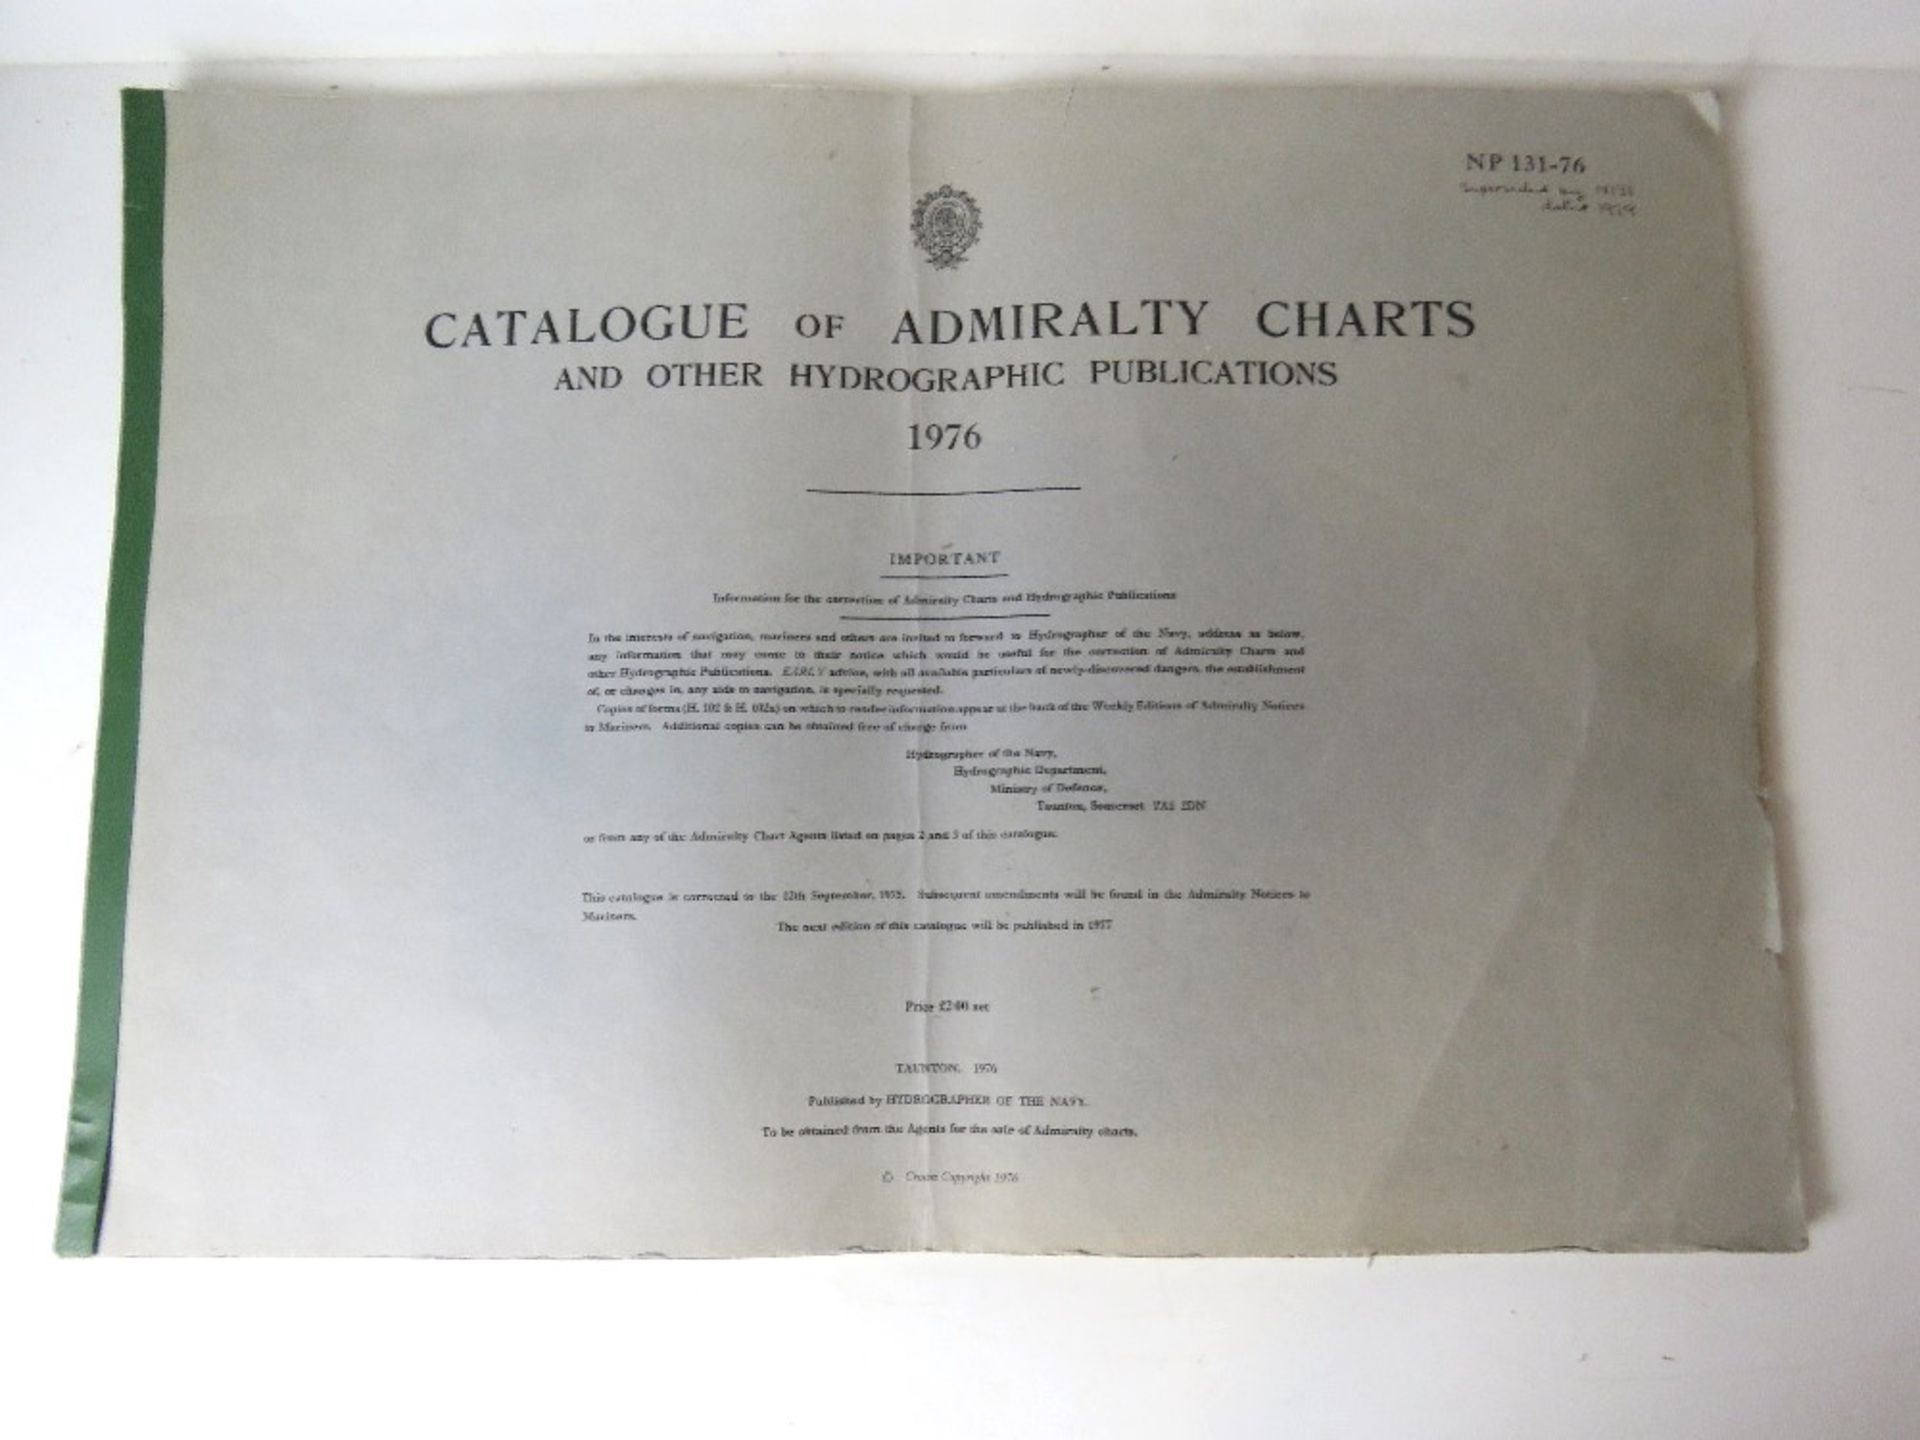 A 'Catalogue of Admiralty Charts and other Hydrographic Publications', published 1976.